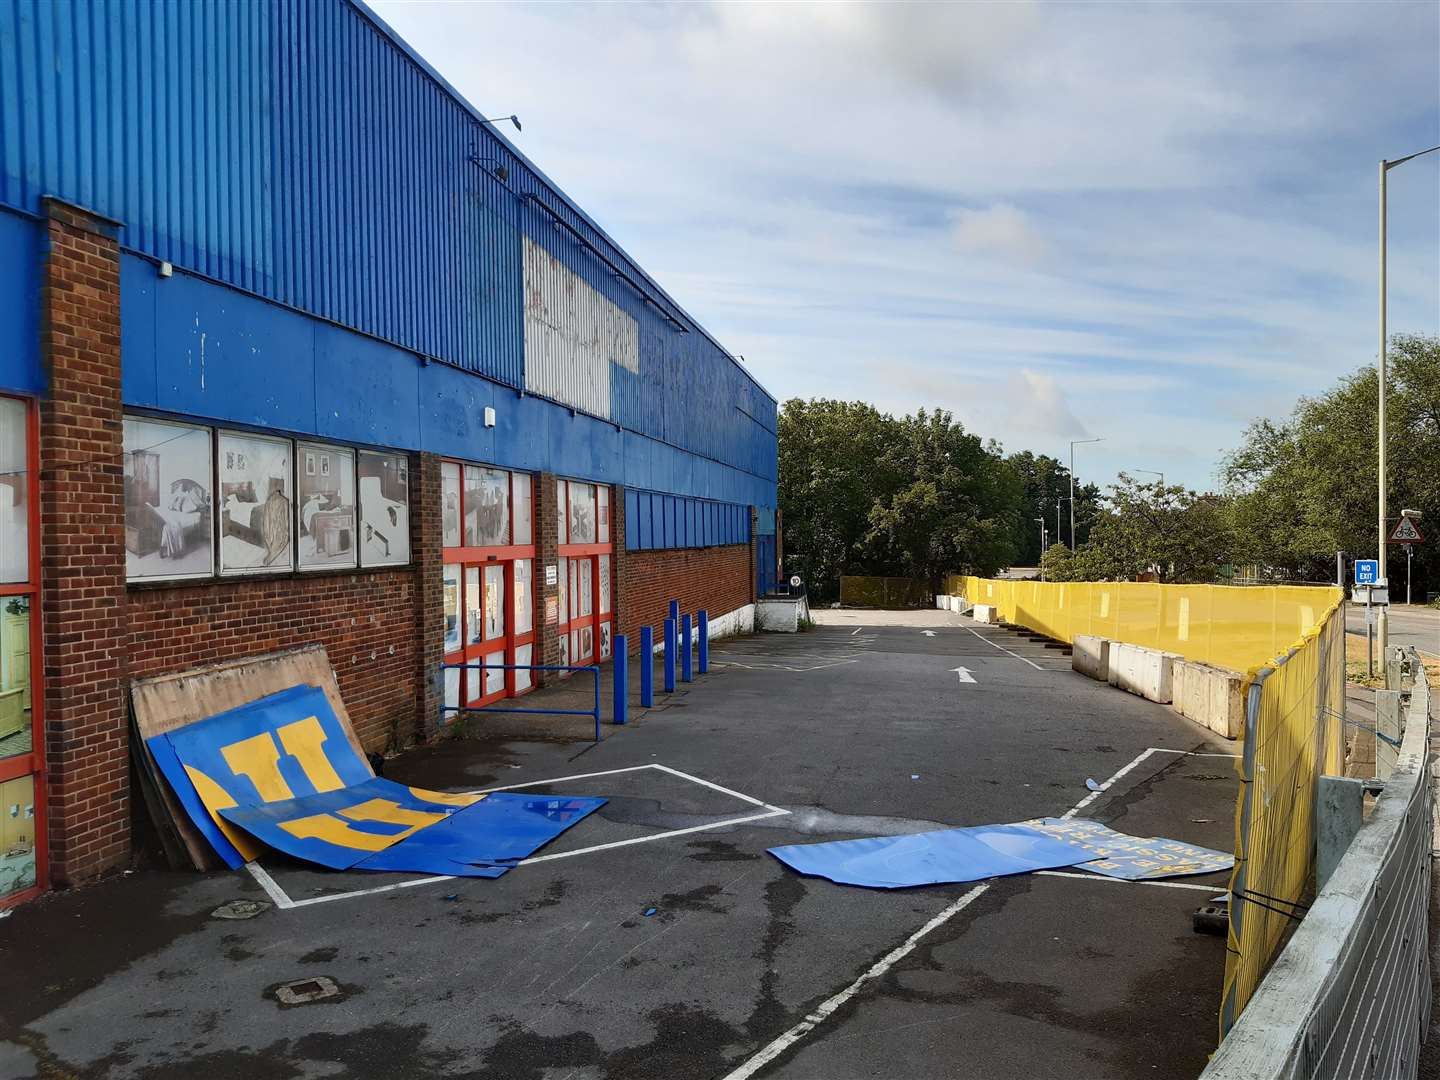 The HomePlus site has now been cordoned off ahead of demolition